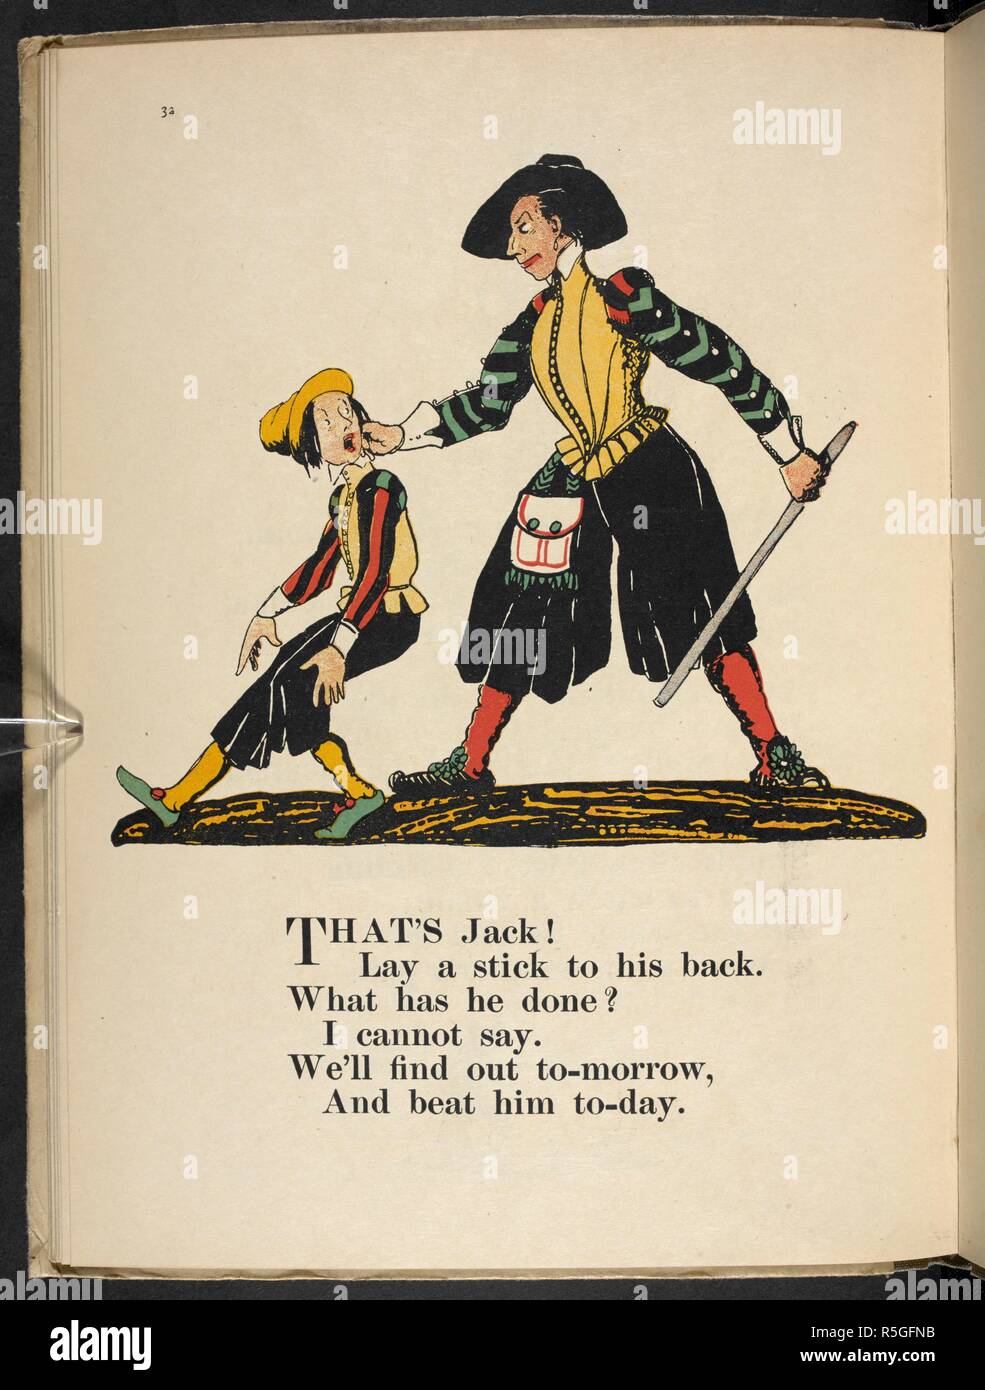 That's Jack! Lay a stick to his back ...'. Nursery Rhymes, with pictures by  C. L. Fraser. London : T. C. & E. C. Jack, [1919]. Source: 12800.ddd.31  page 32. Author: Fraser, Claud Lovat Stock Photo - Alamy